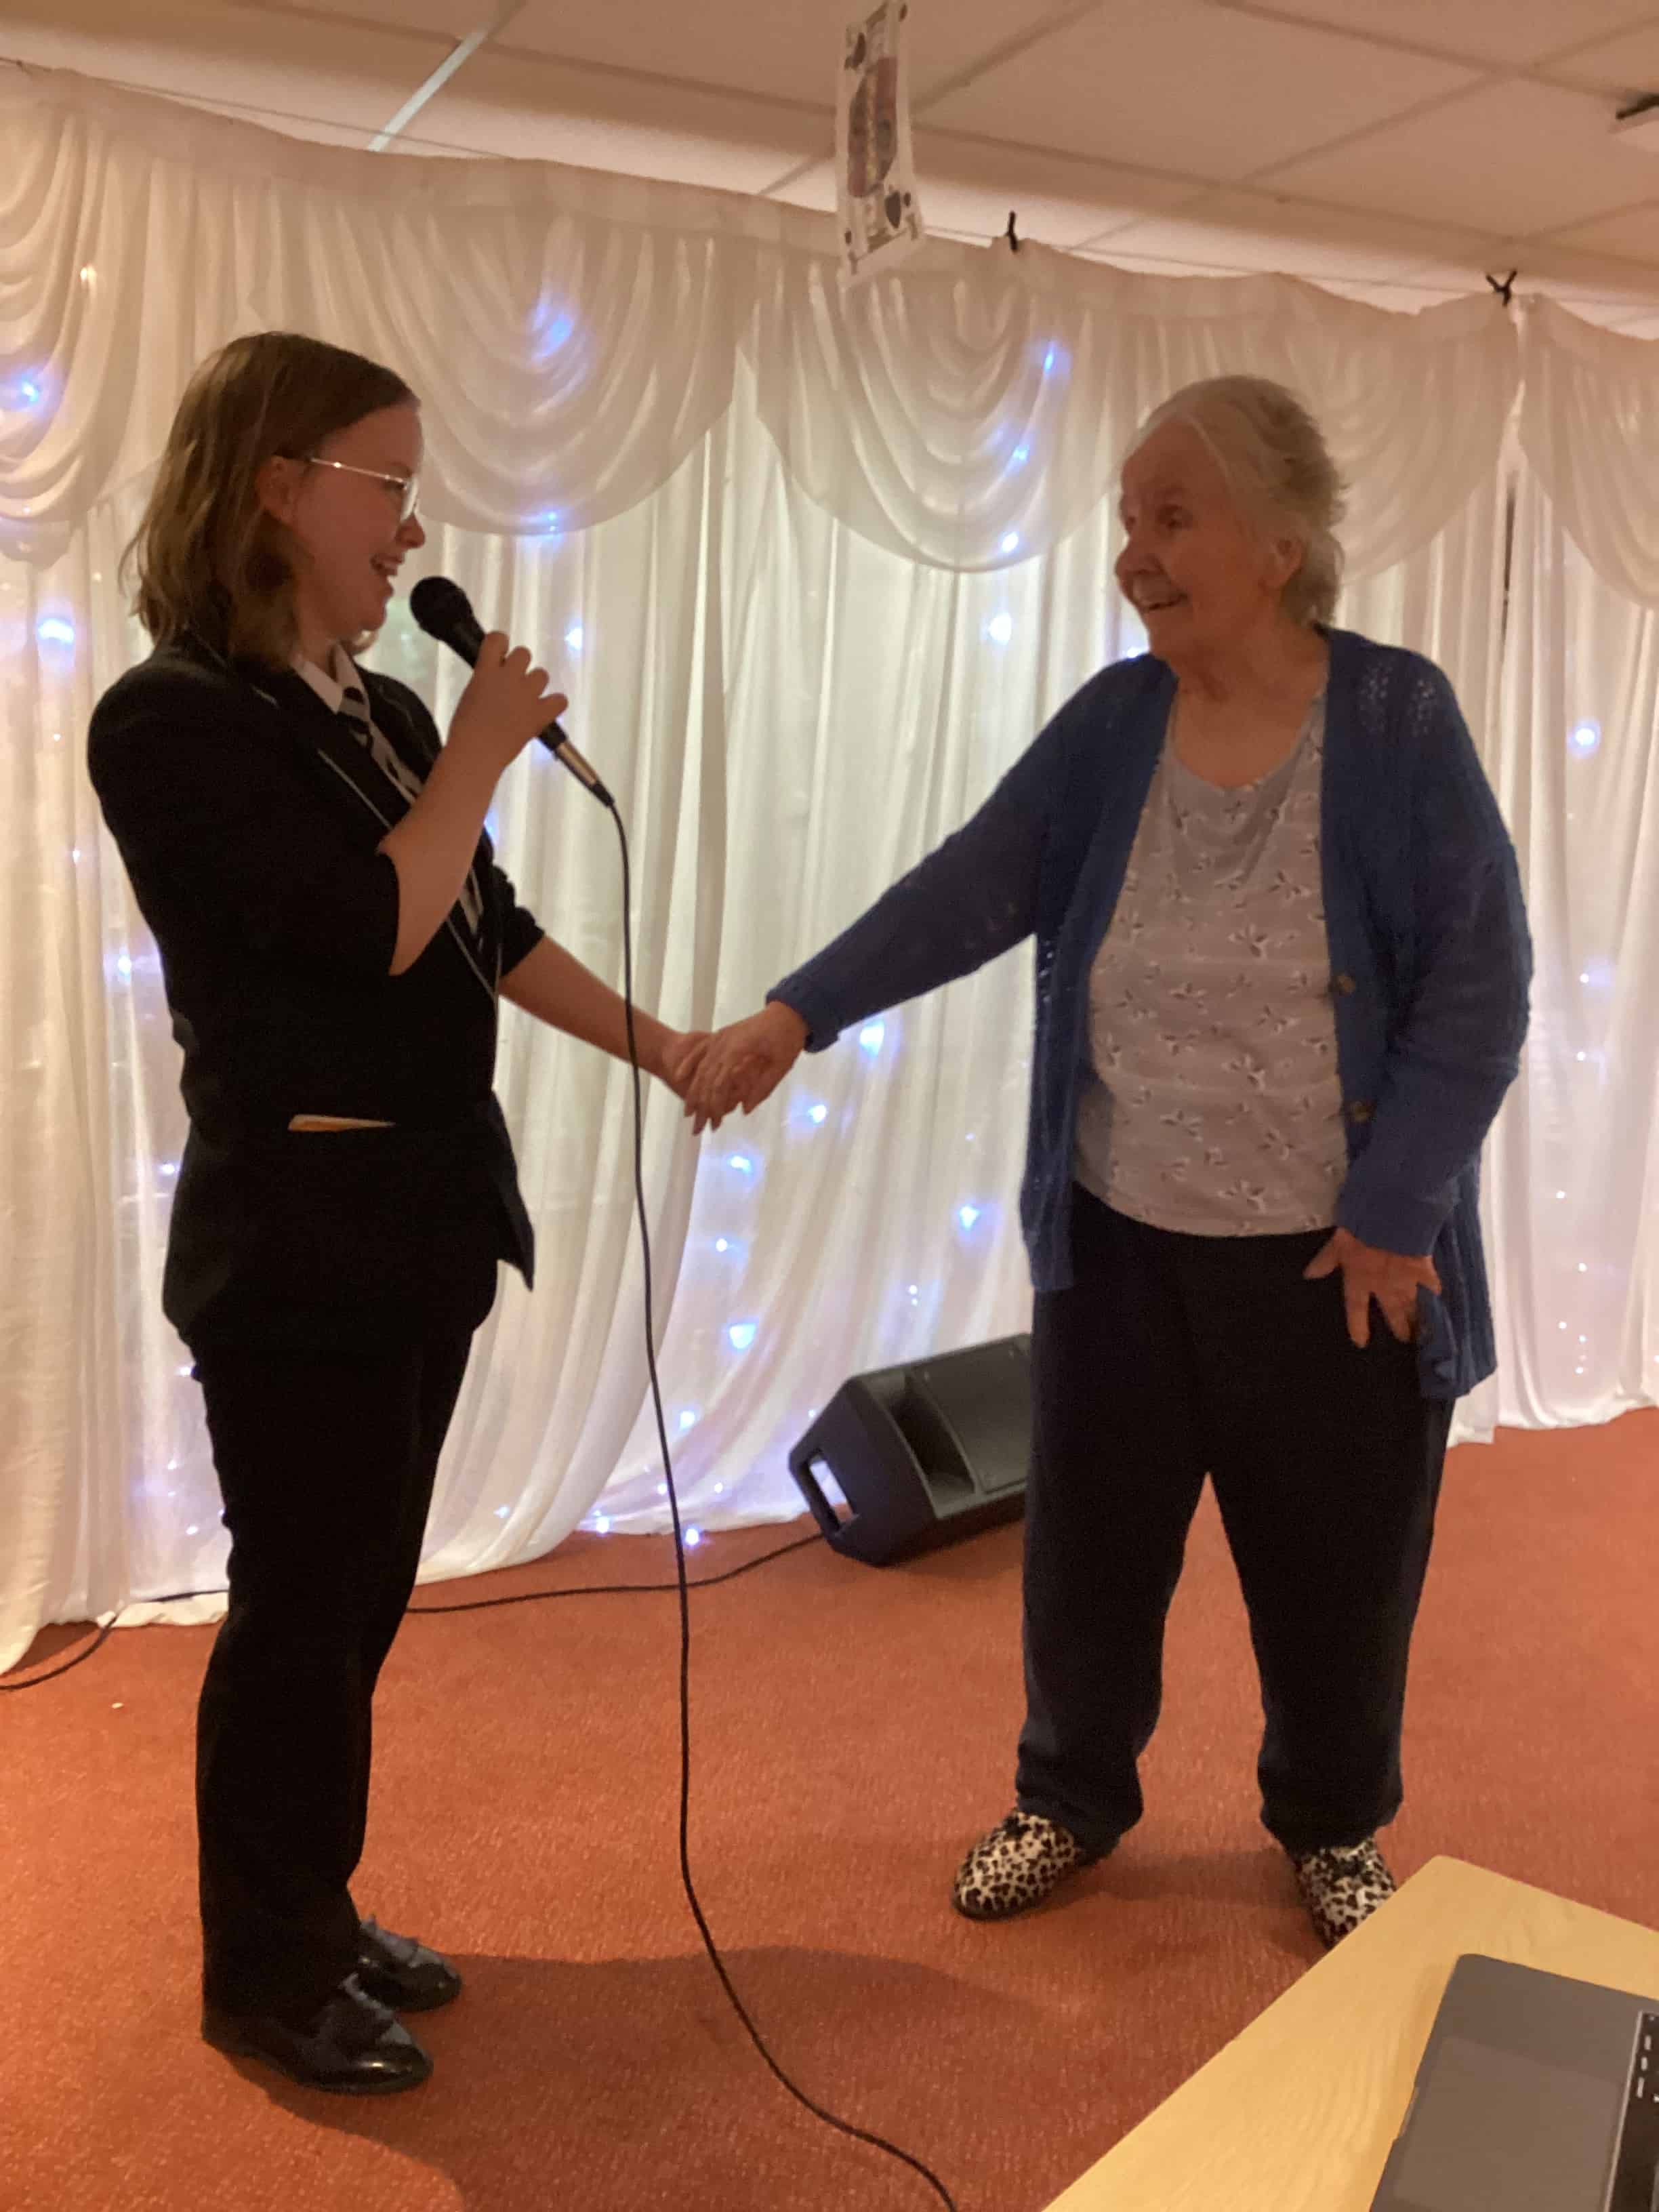 A Laurus Ryecroft student sings with a resident at a care home as part of their active citizenship mission